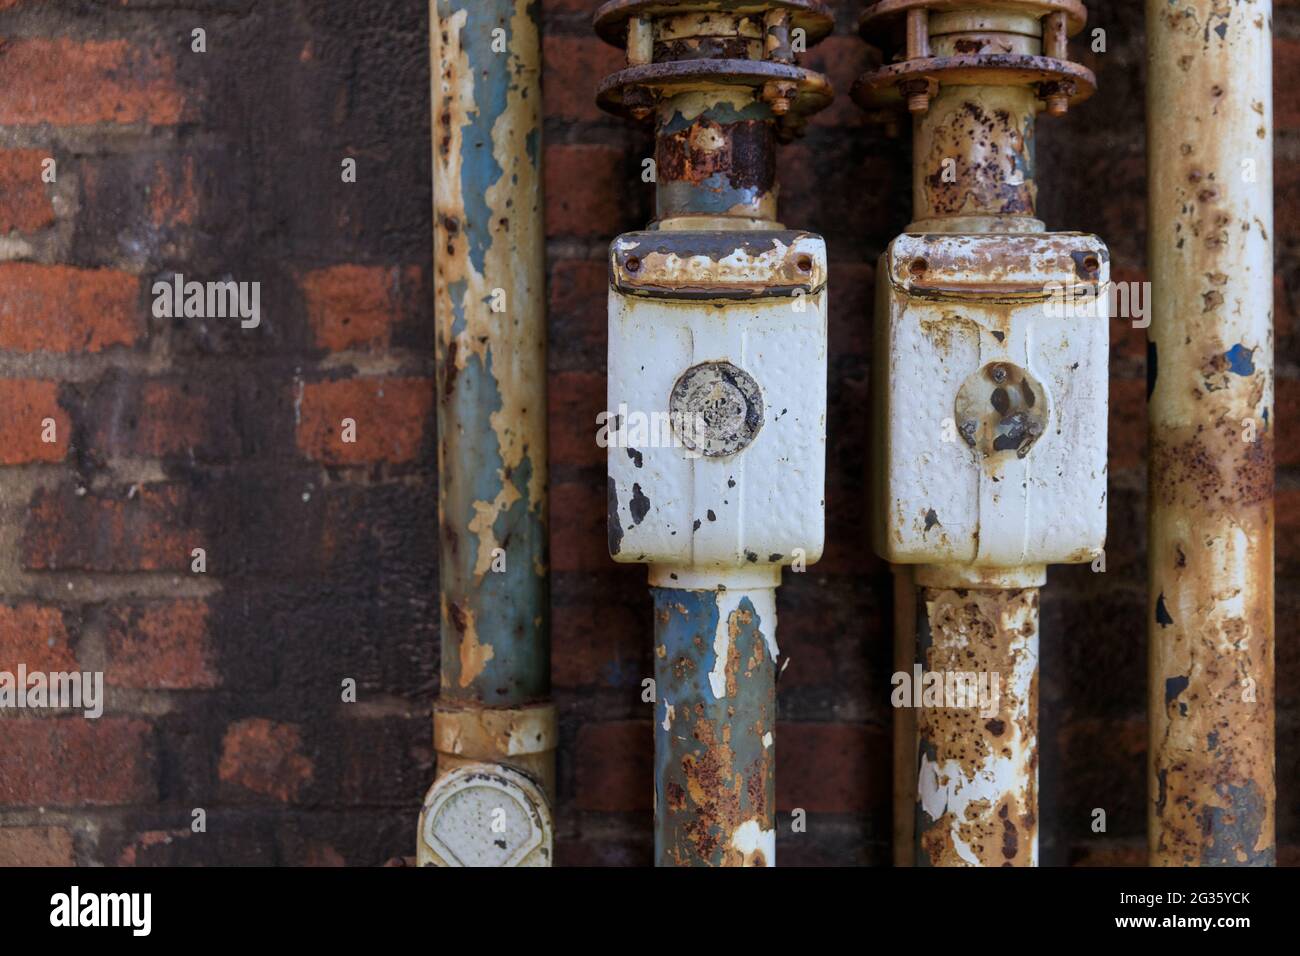 Industrial structures and pipes, former ironworks and steel manufacturing, Germany Stock Photo